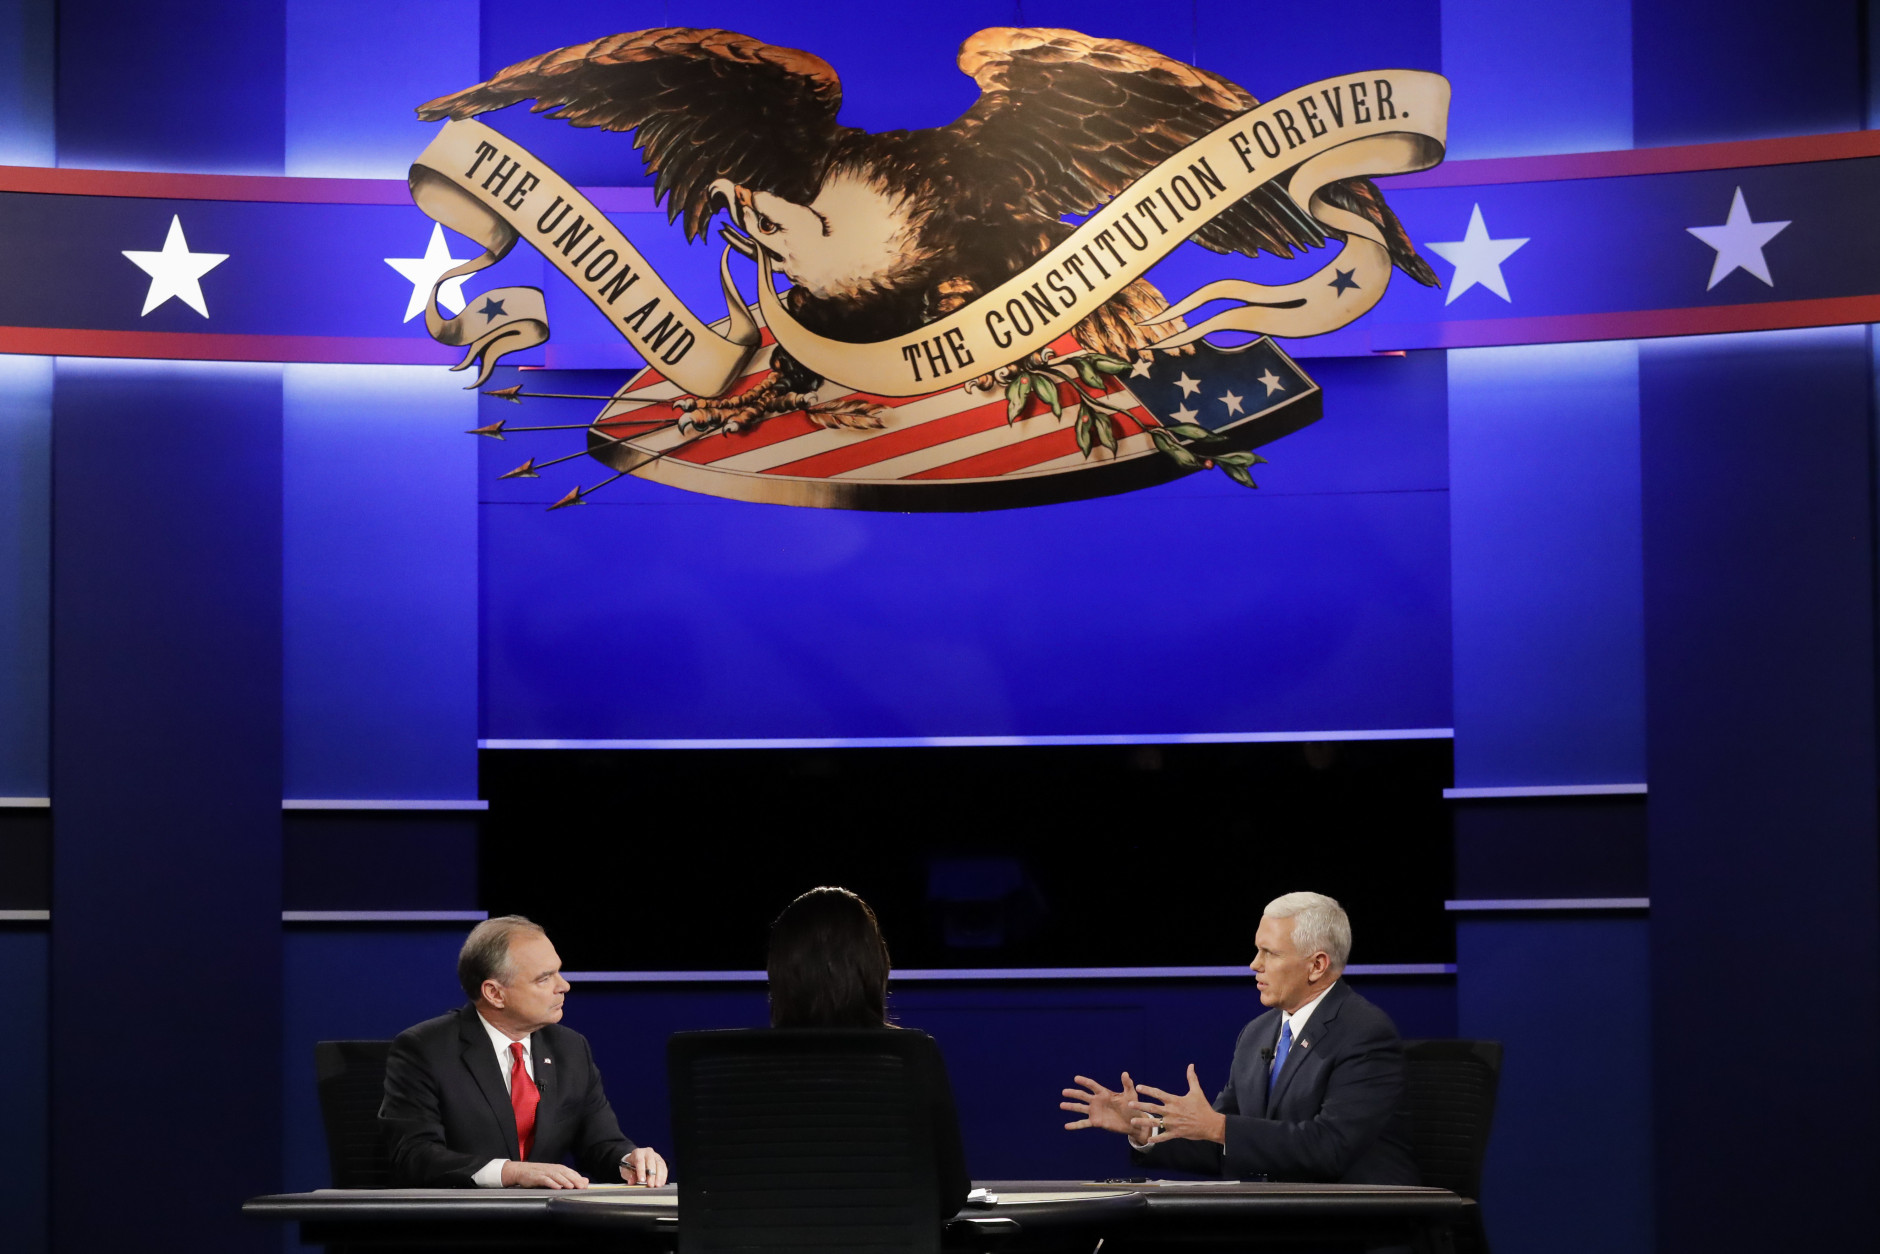 Republican vice-presidential nominee Gov. Mike Pence answers a questions as Democratic vice-presidential nominee Sen. Tim Kaine listens during the vice-presidential debate at Longwood University in Farmville, Va., Tuesday, Oct. 4, 2016. (AP Photo/David Goldman)